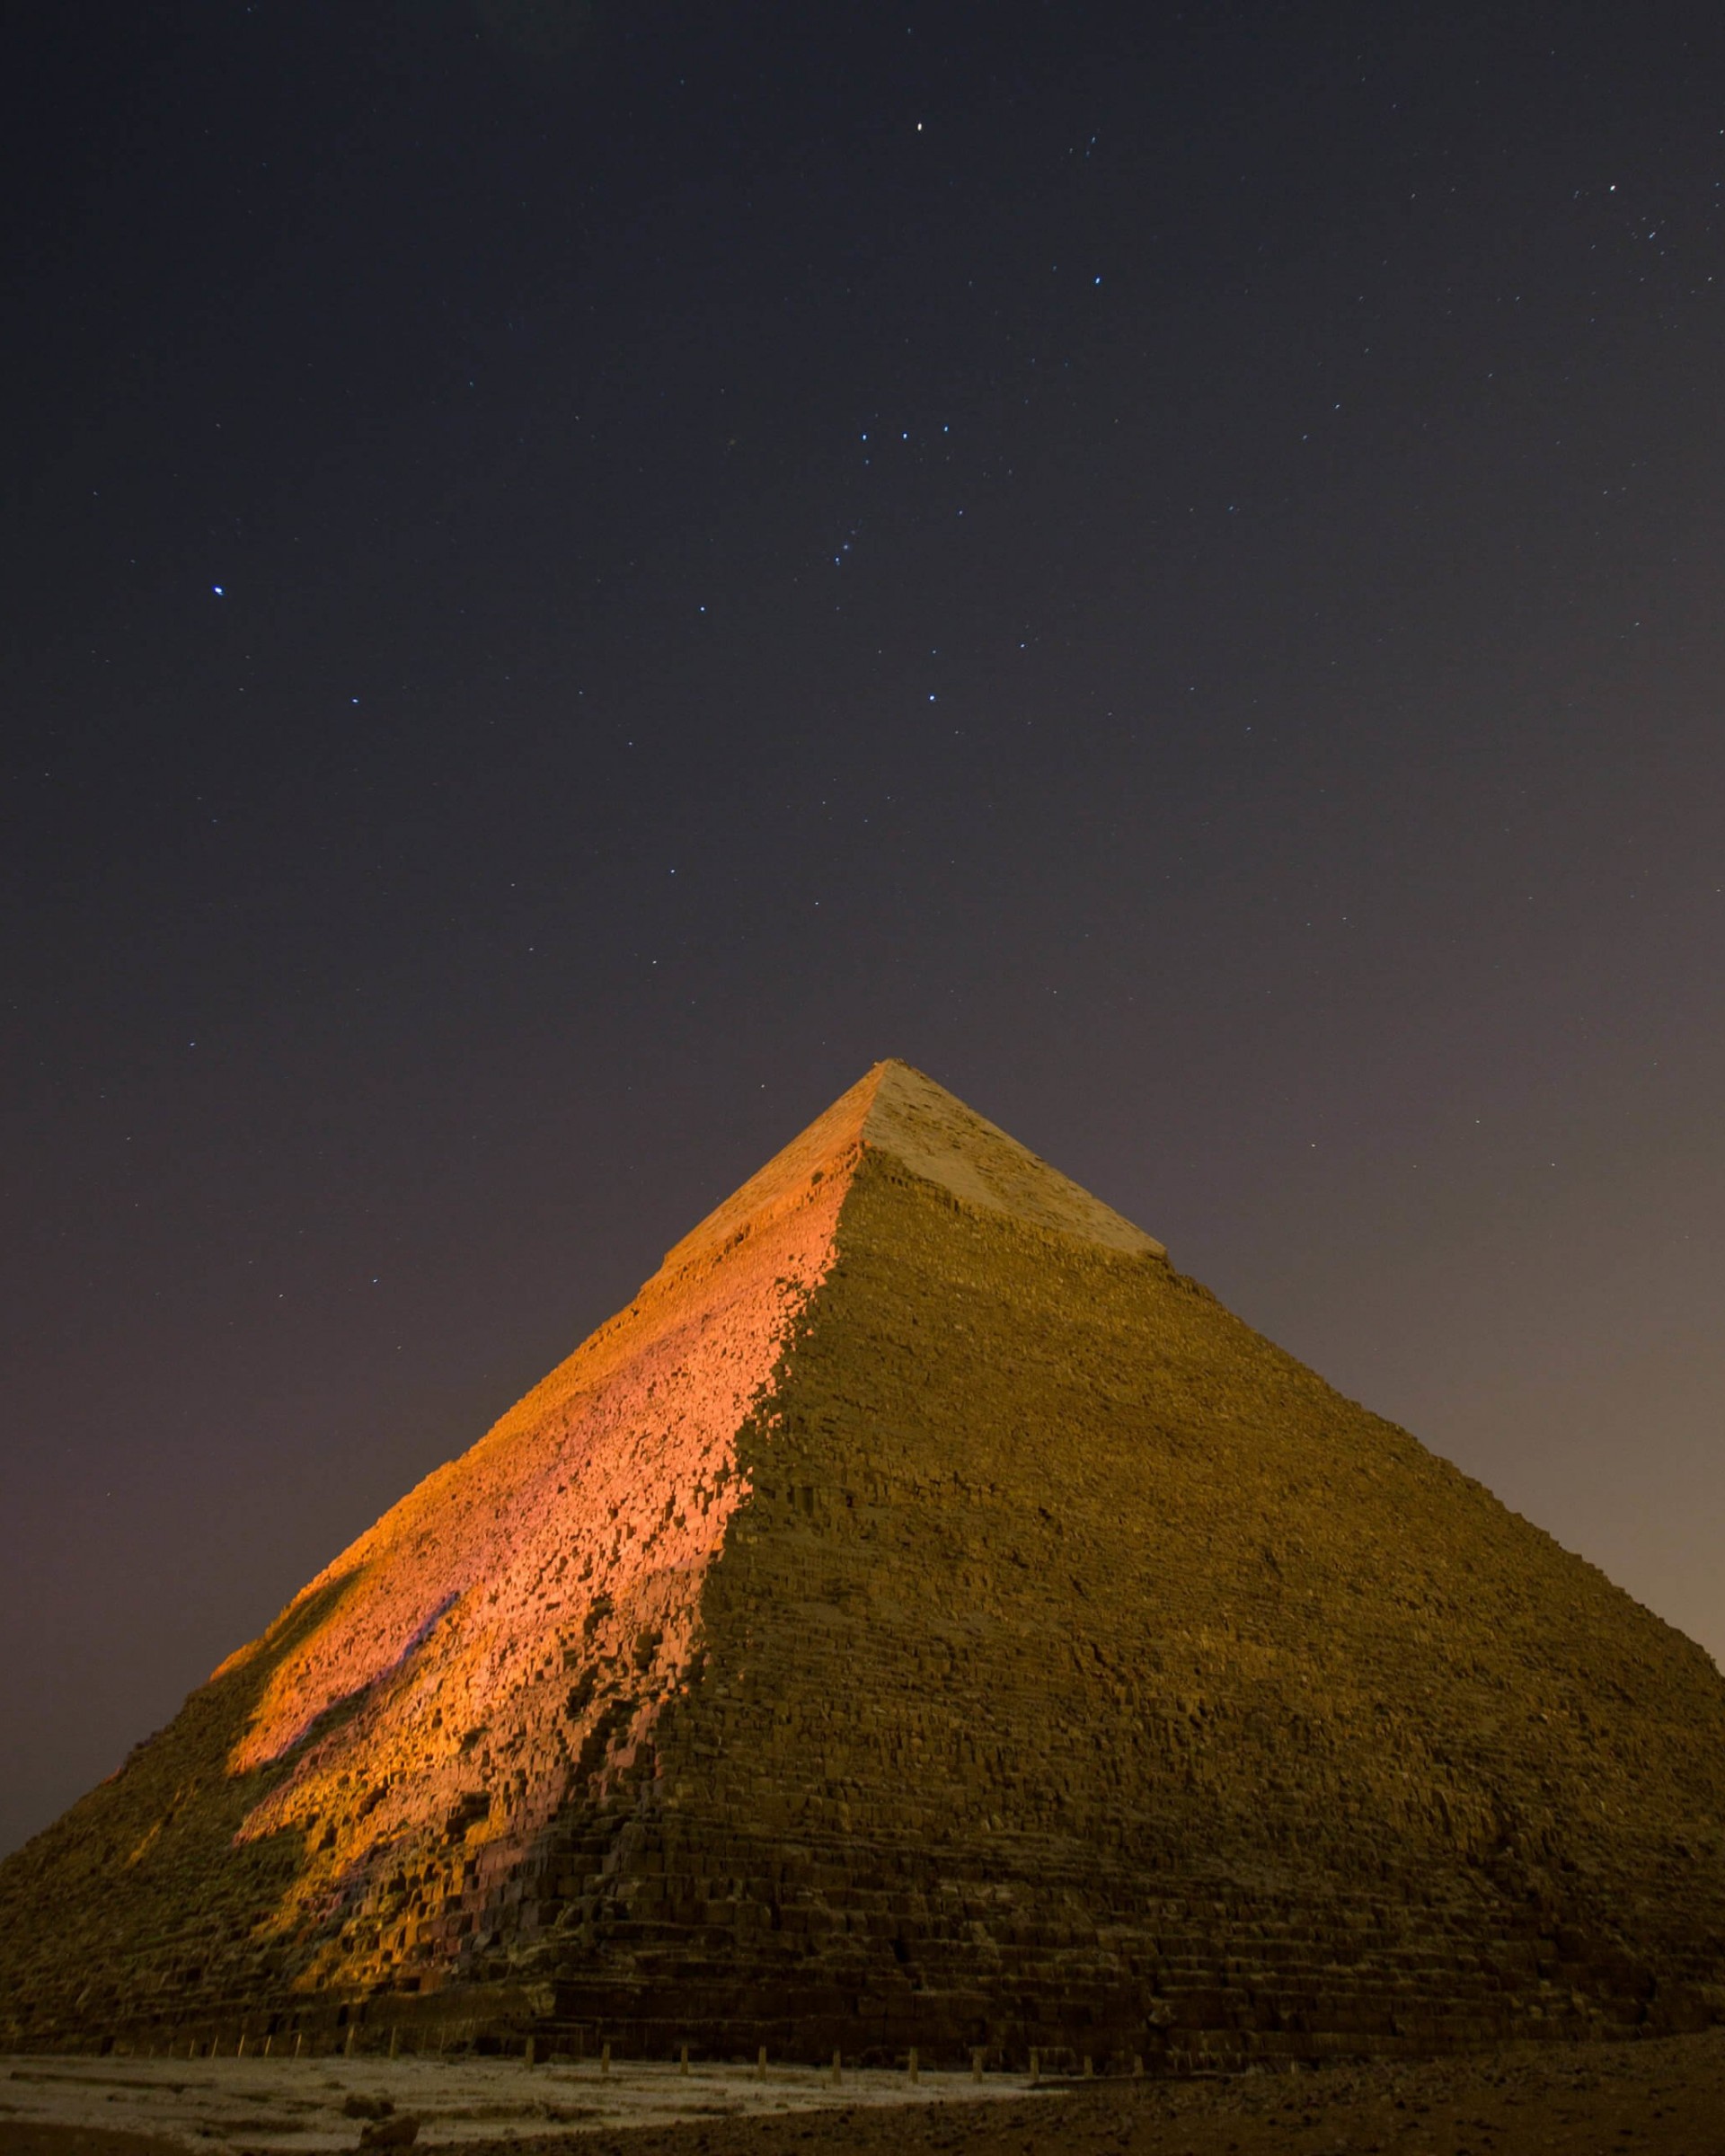 Download Pyramid by Night HD wallpaper for Nexus 7 - HDwallpapers.net